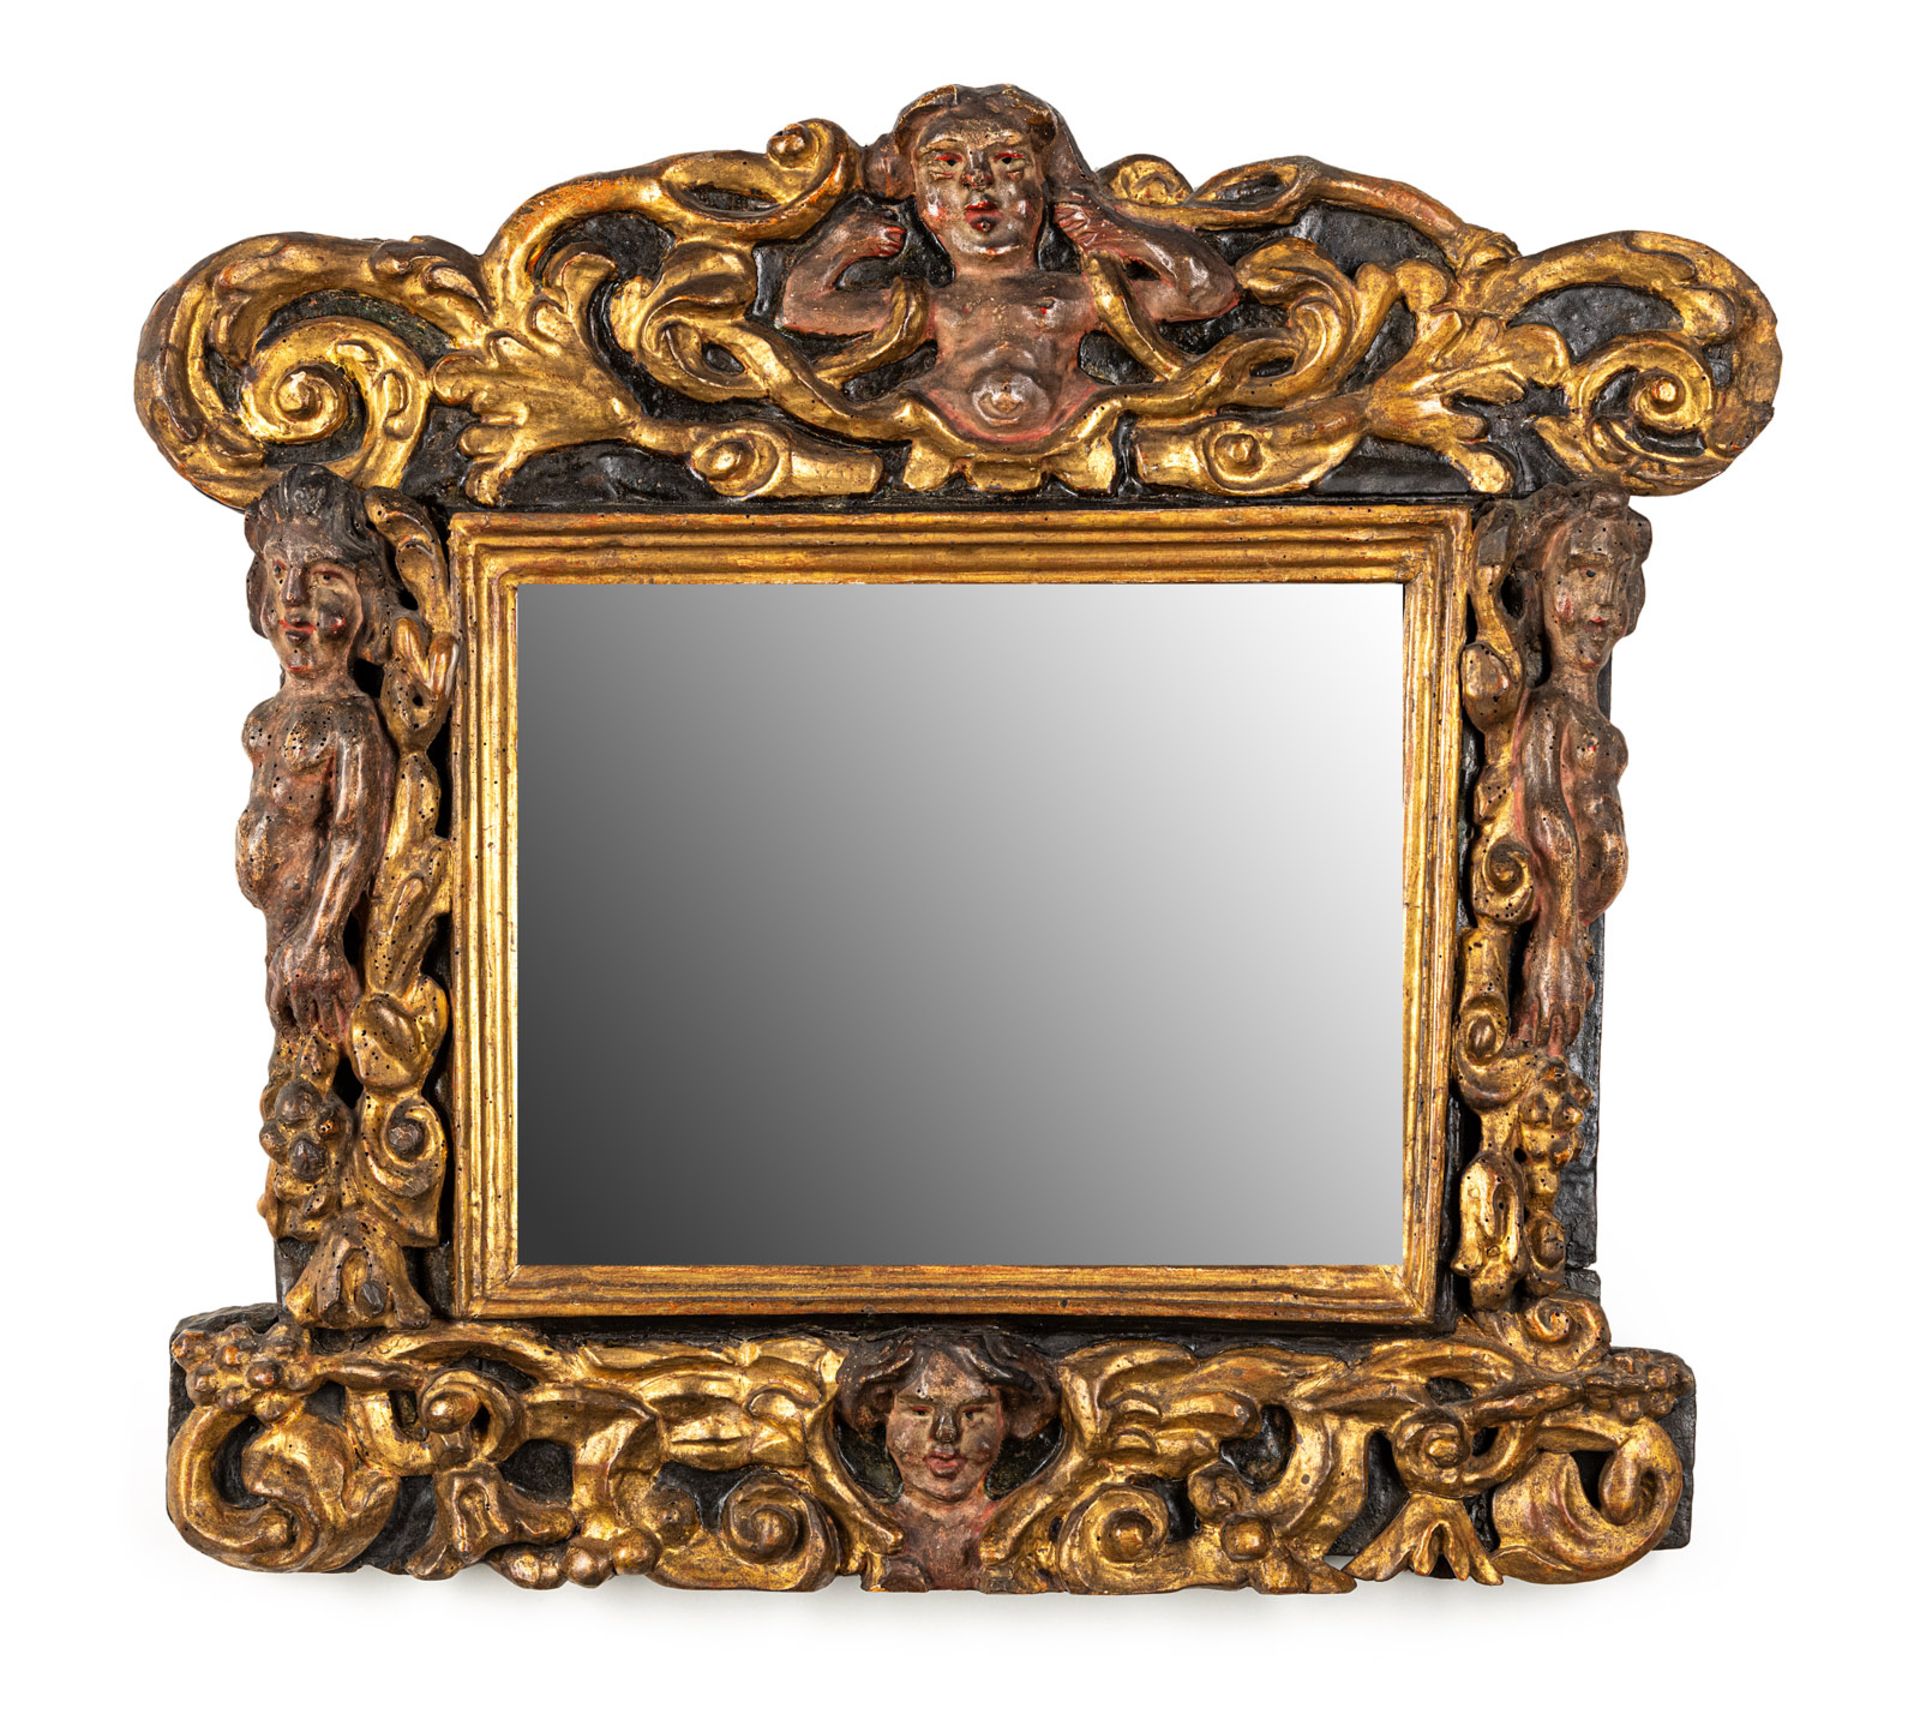 A NORTH ITALIAN POLYCHROME AND GILT CARVED WOOD MIRROR